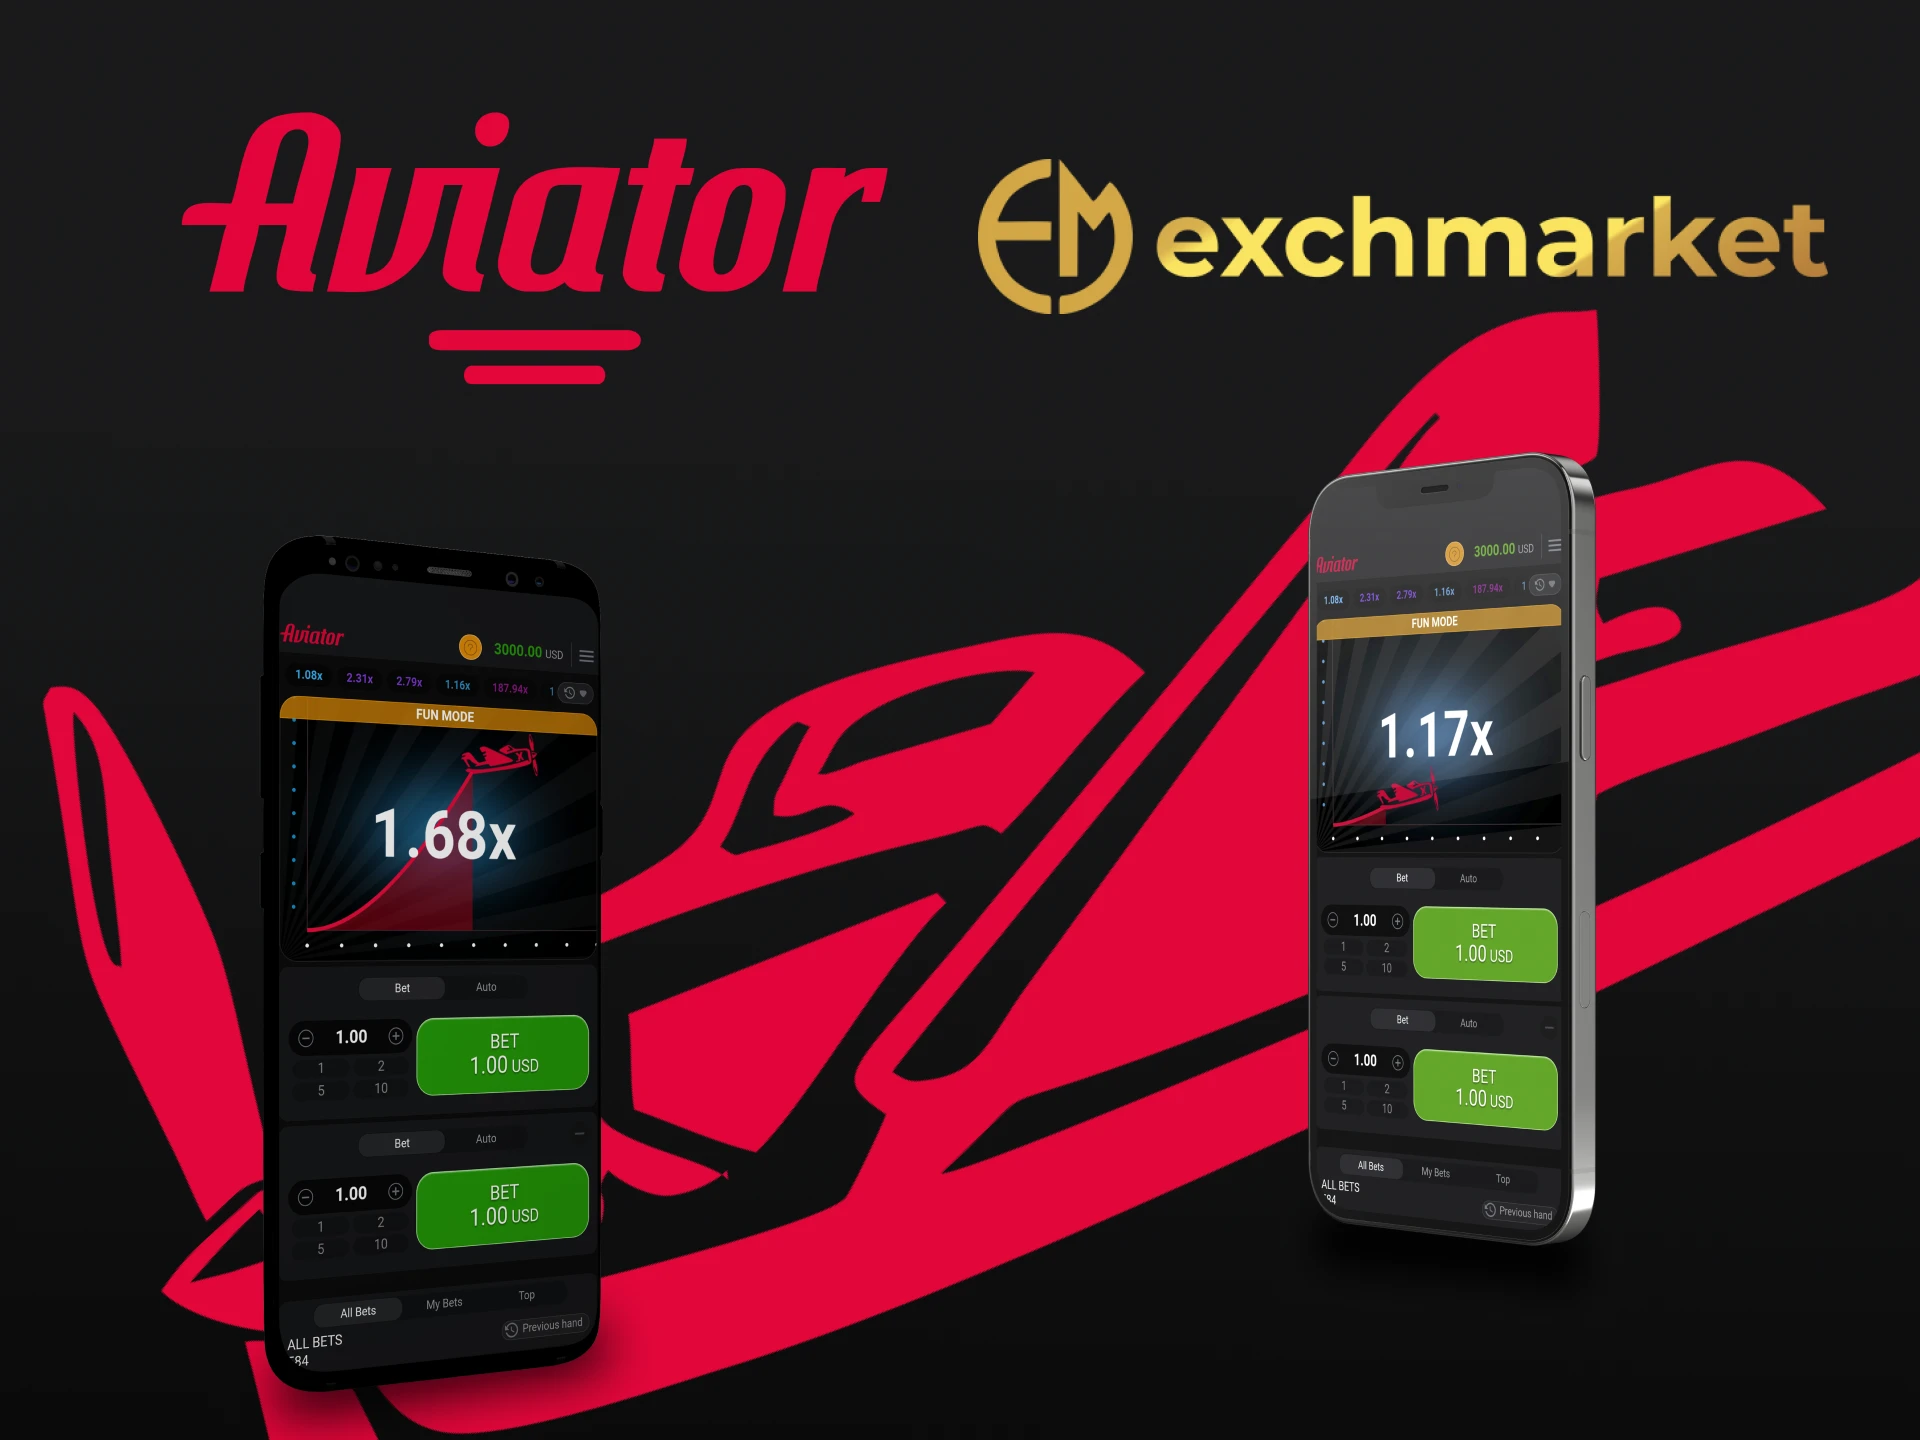 You can play Aviator through any device on Exchmarket.